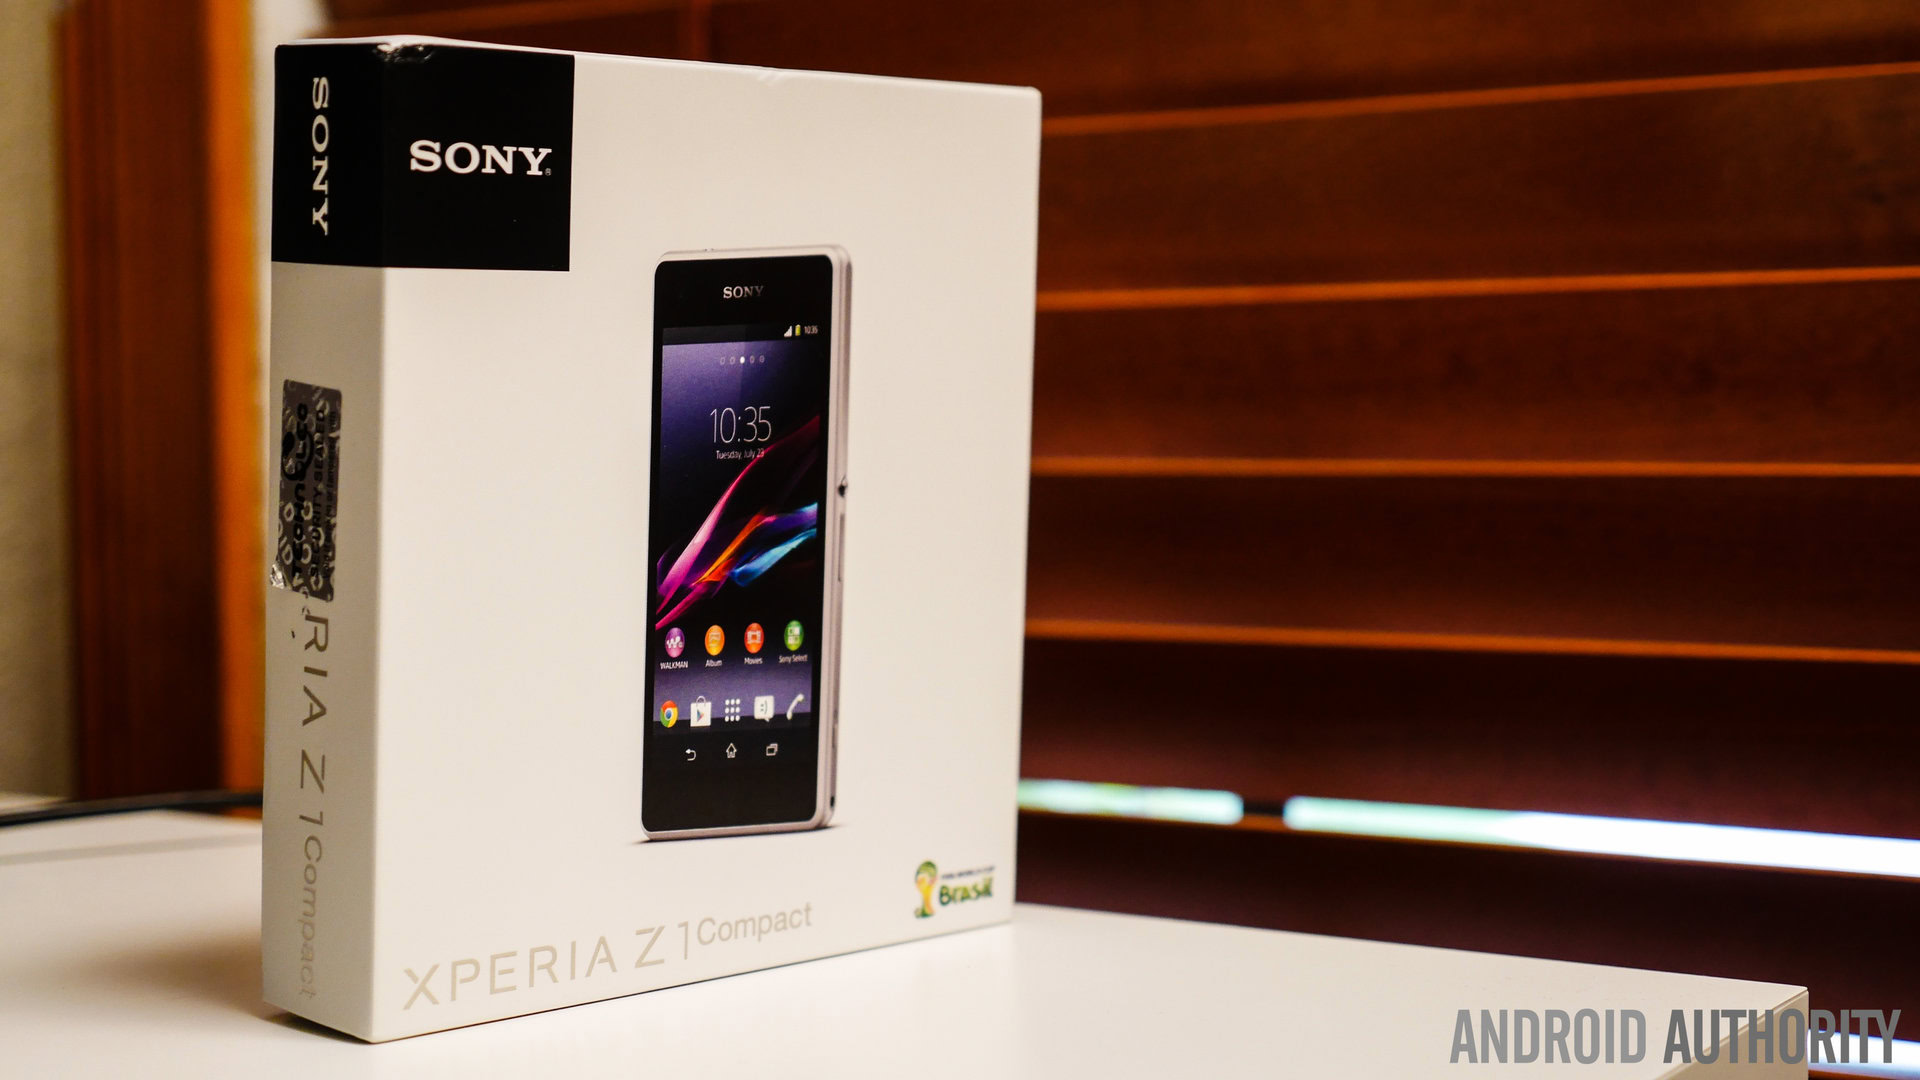 dorst Mew Mew Oprecht Sony Xperia Z1 Compact unboxing and first impressions